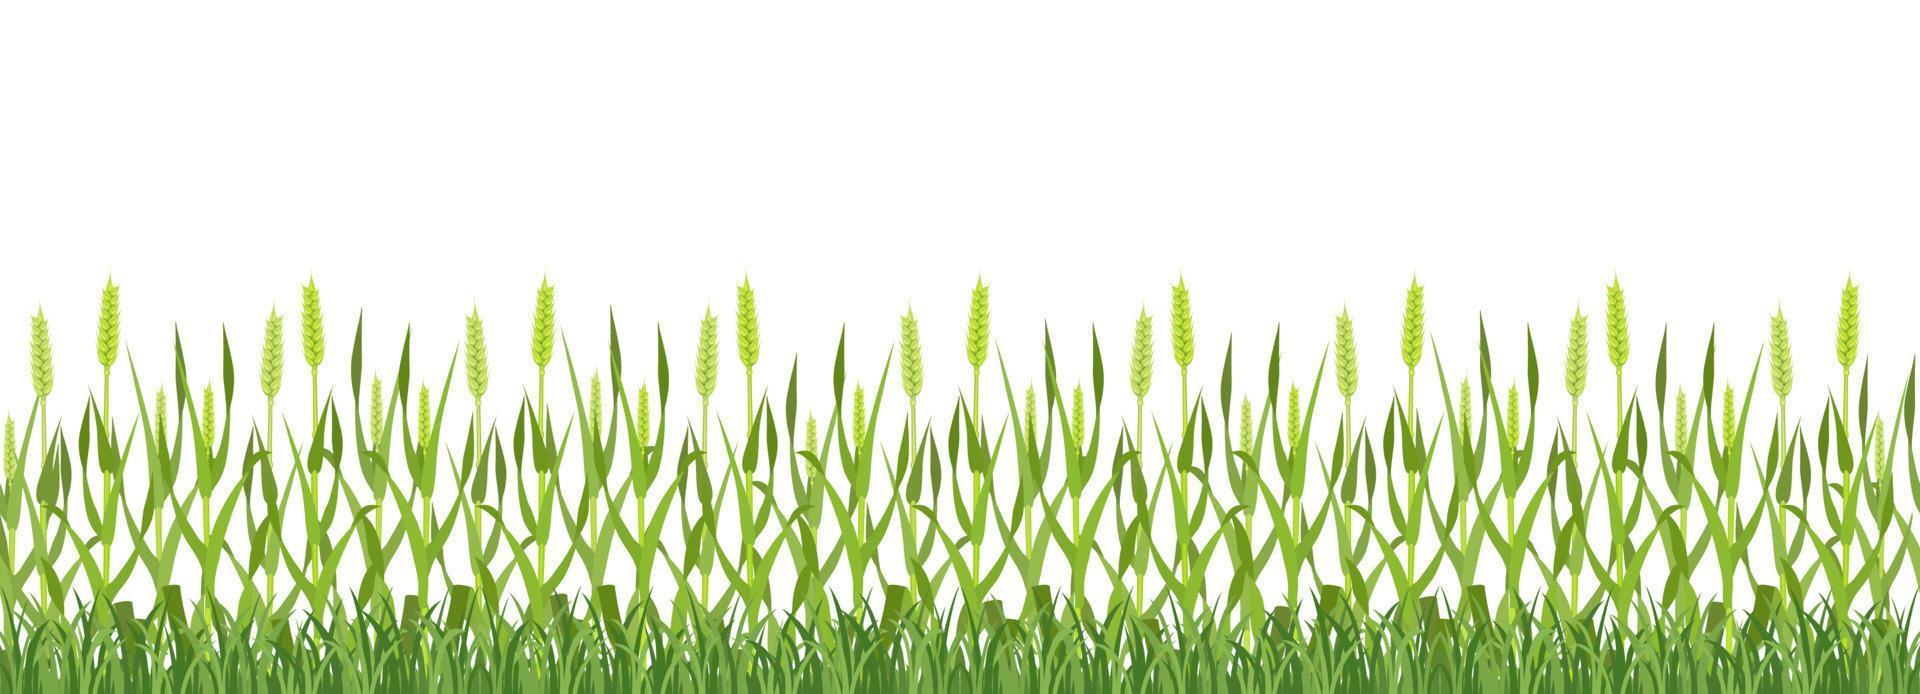 Background of green wheat field. Seamless border of ears of corn with grass. vector